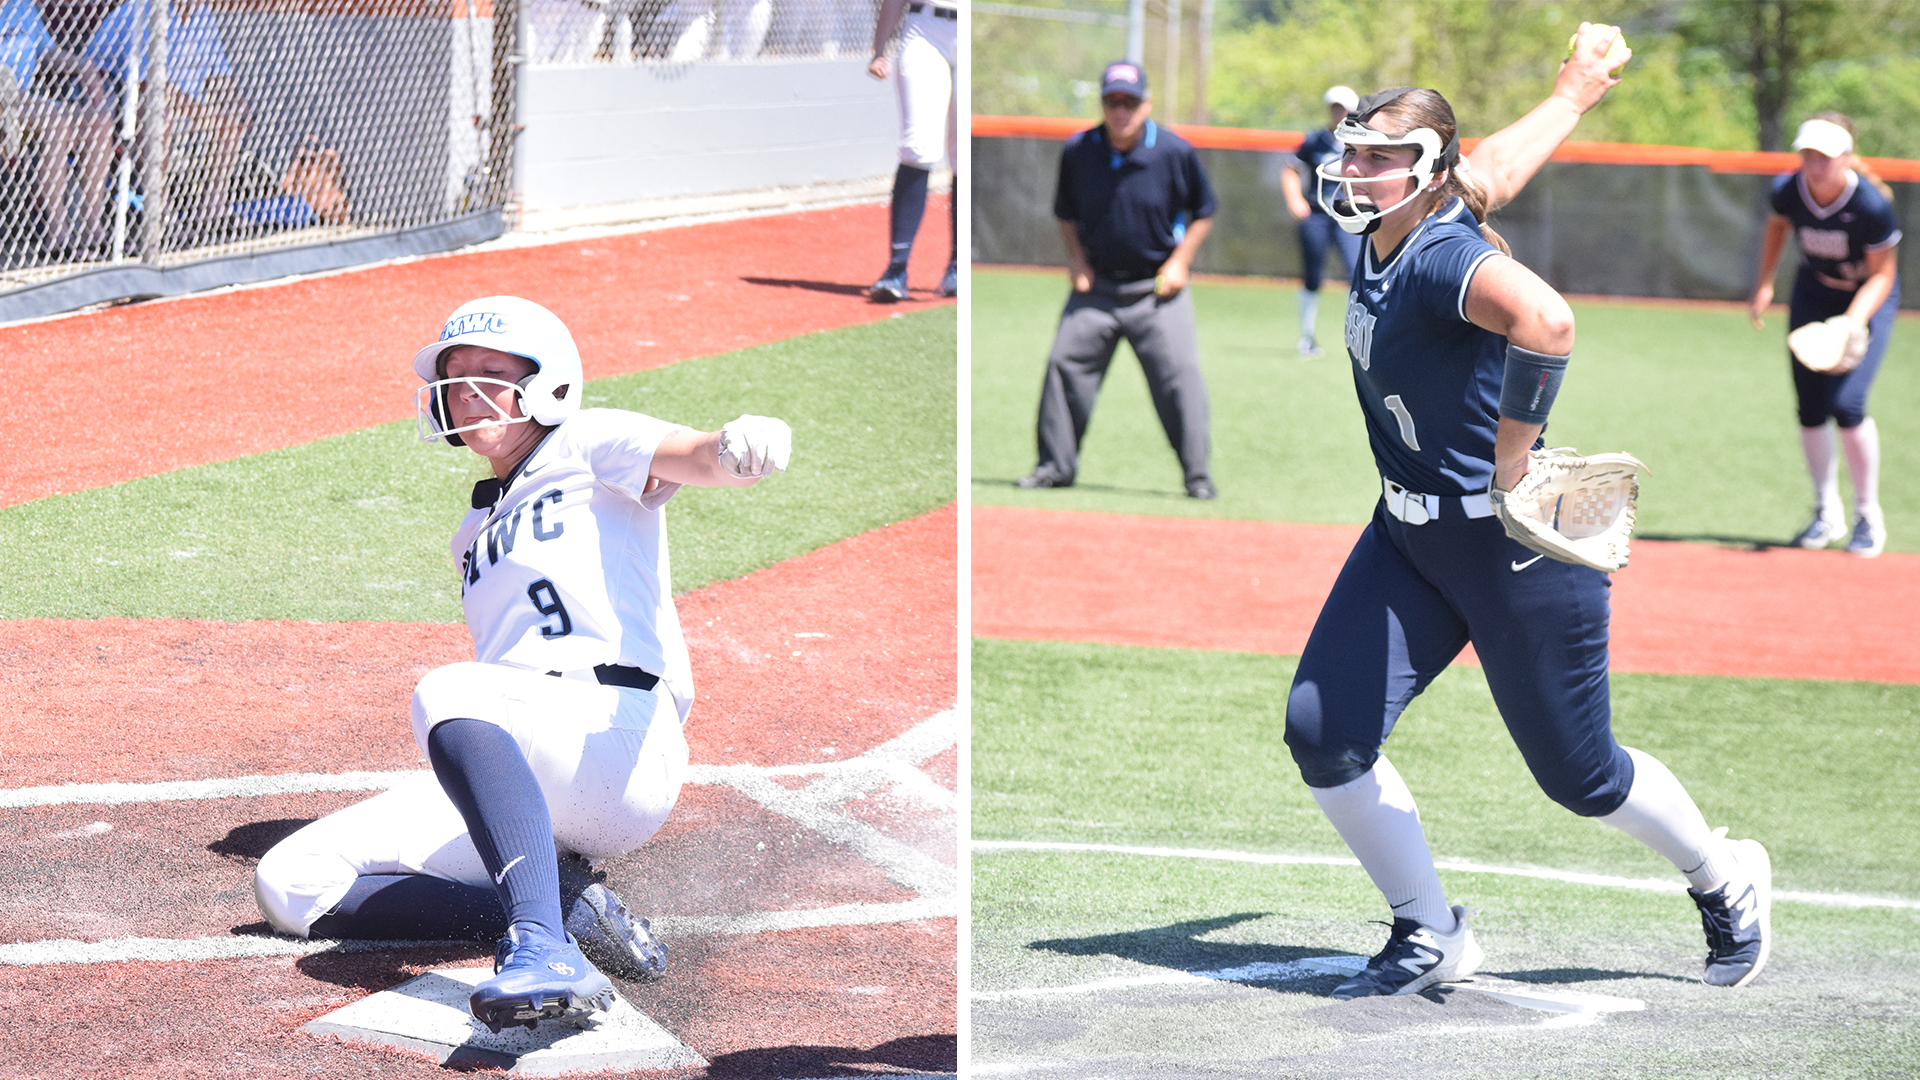 St. Mary-of-the-Woods College's Jasmine Kinder (left) scores a run against Ohio Christian University, while Shawnee State's Cassie Berry fires a pitch plateward in the Bears' win over Midway University during the first day of action at the River States Conference Softball Championship in South Charleston, W.Va.